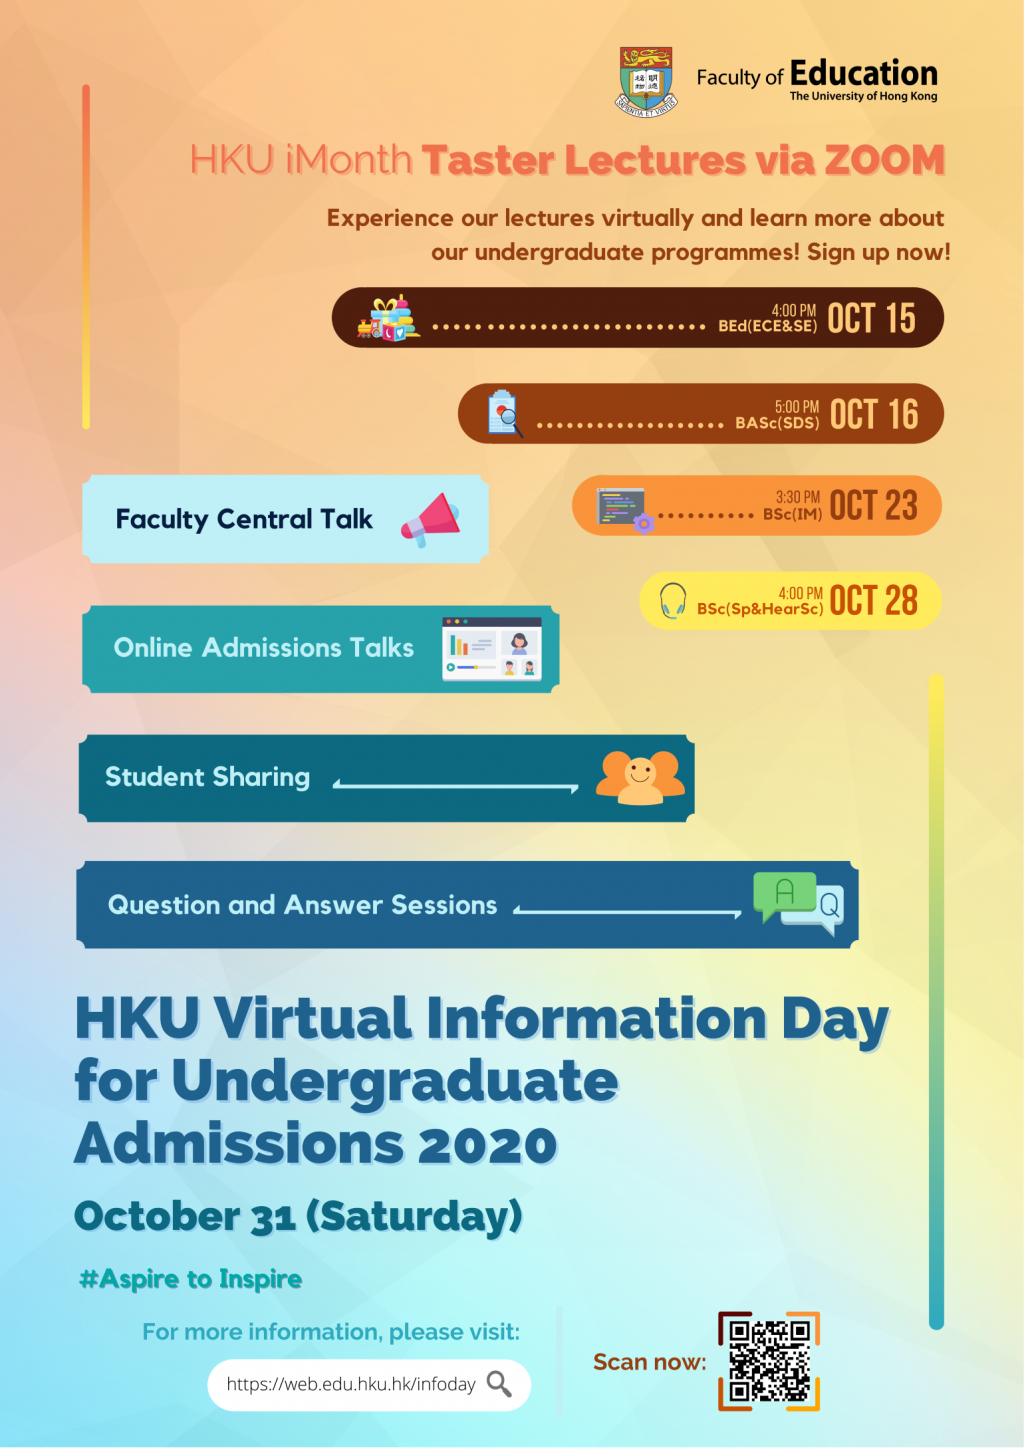 HKU iMonth & Virtual Information Day for Undergraduate Admissions 2020